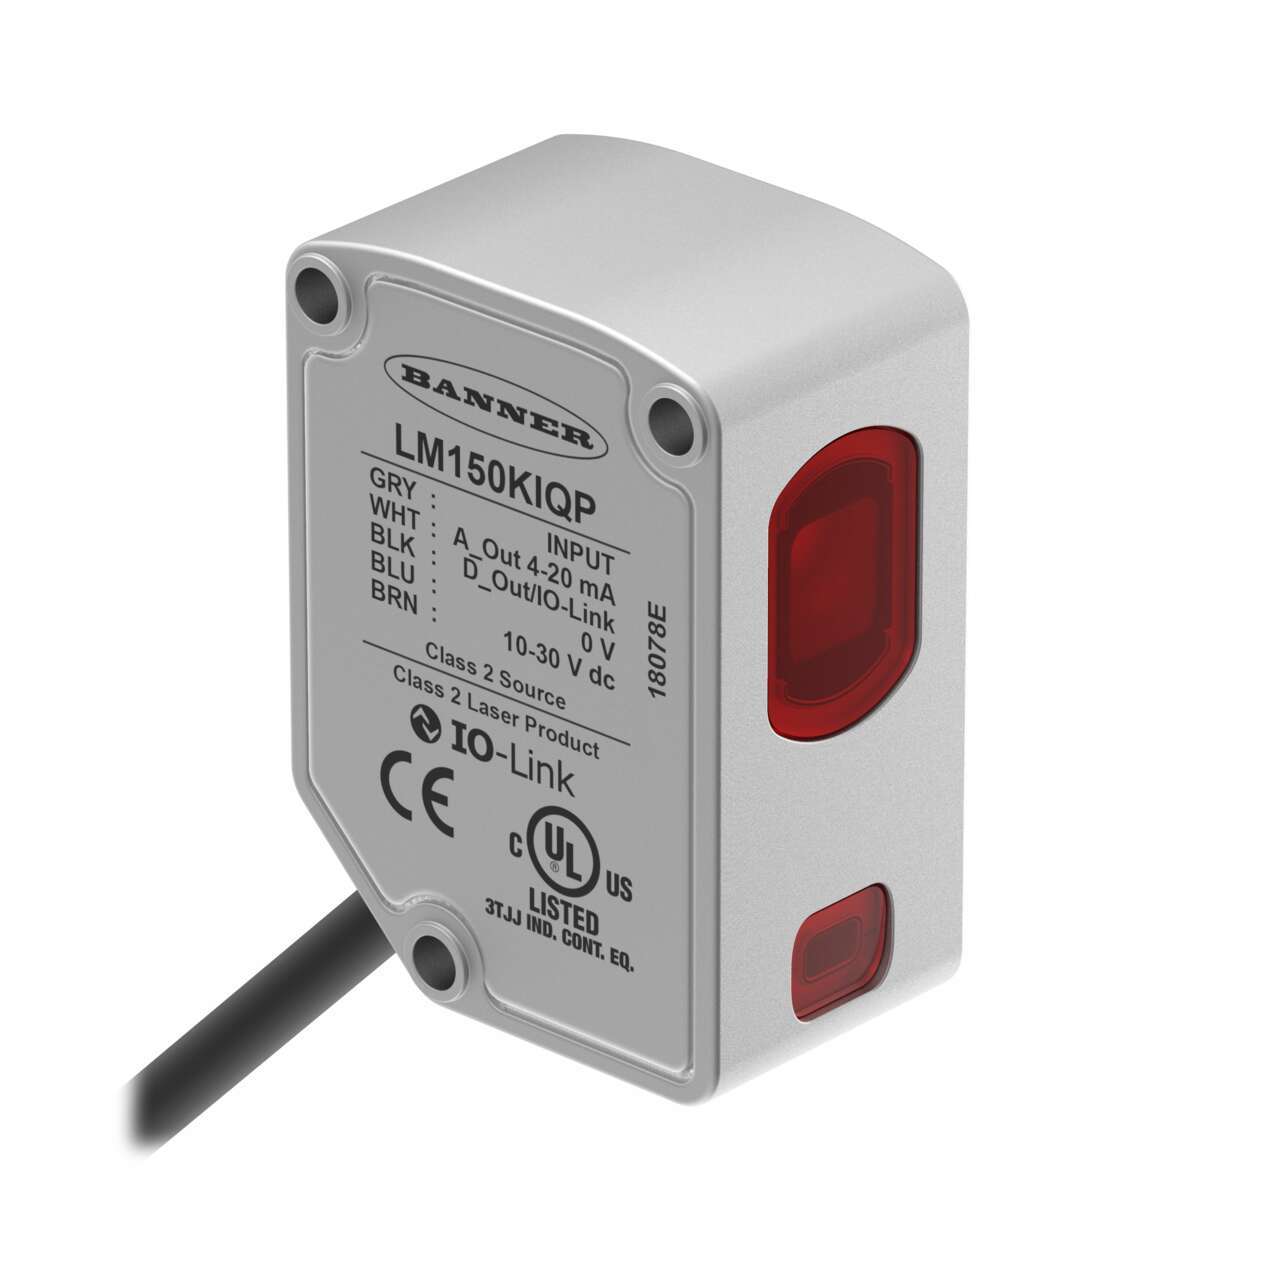 lm150kiqp-with-label